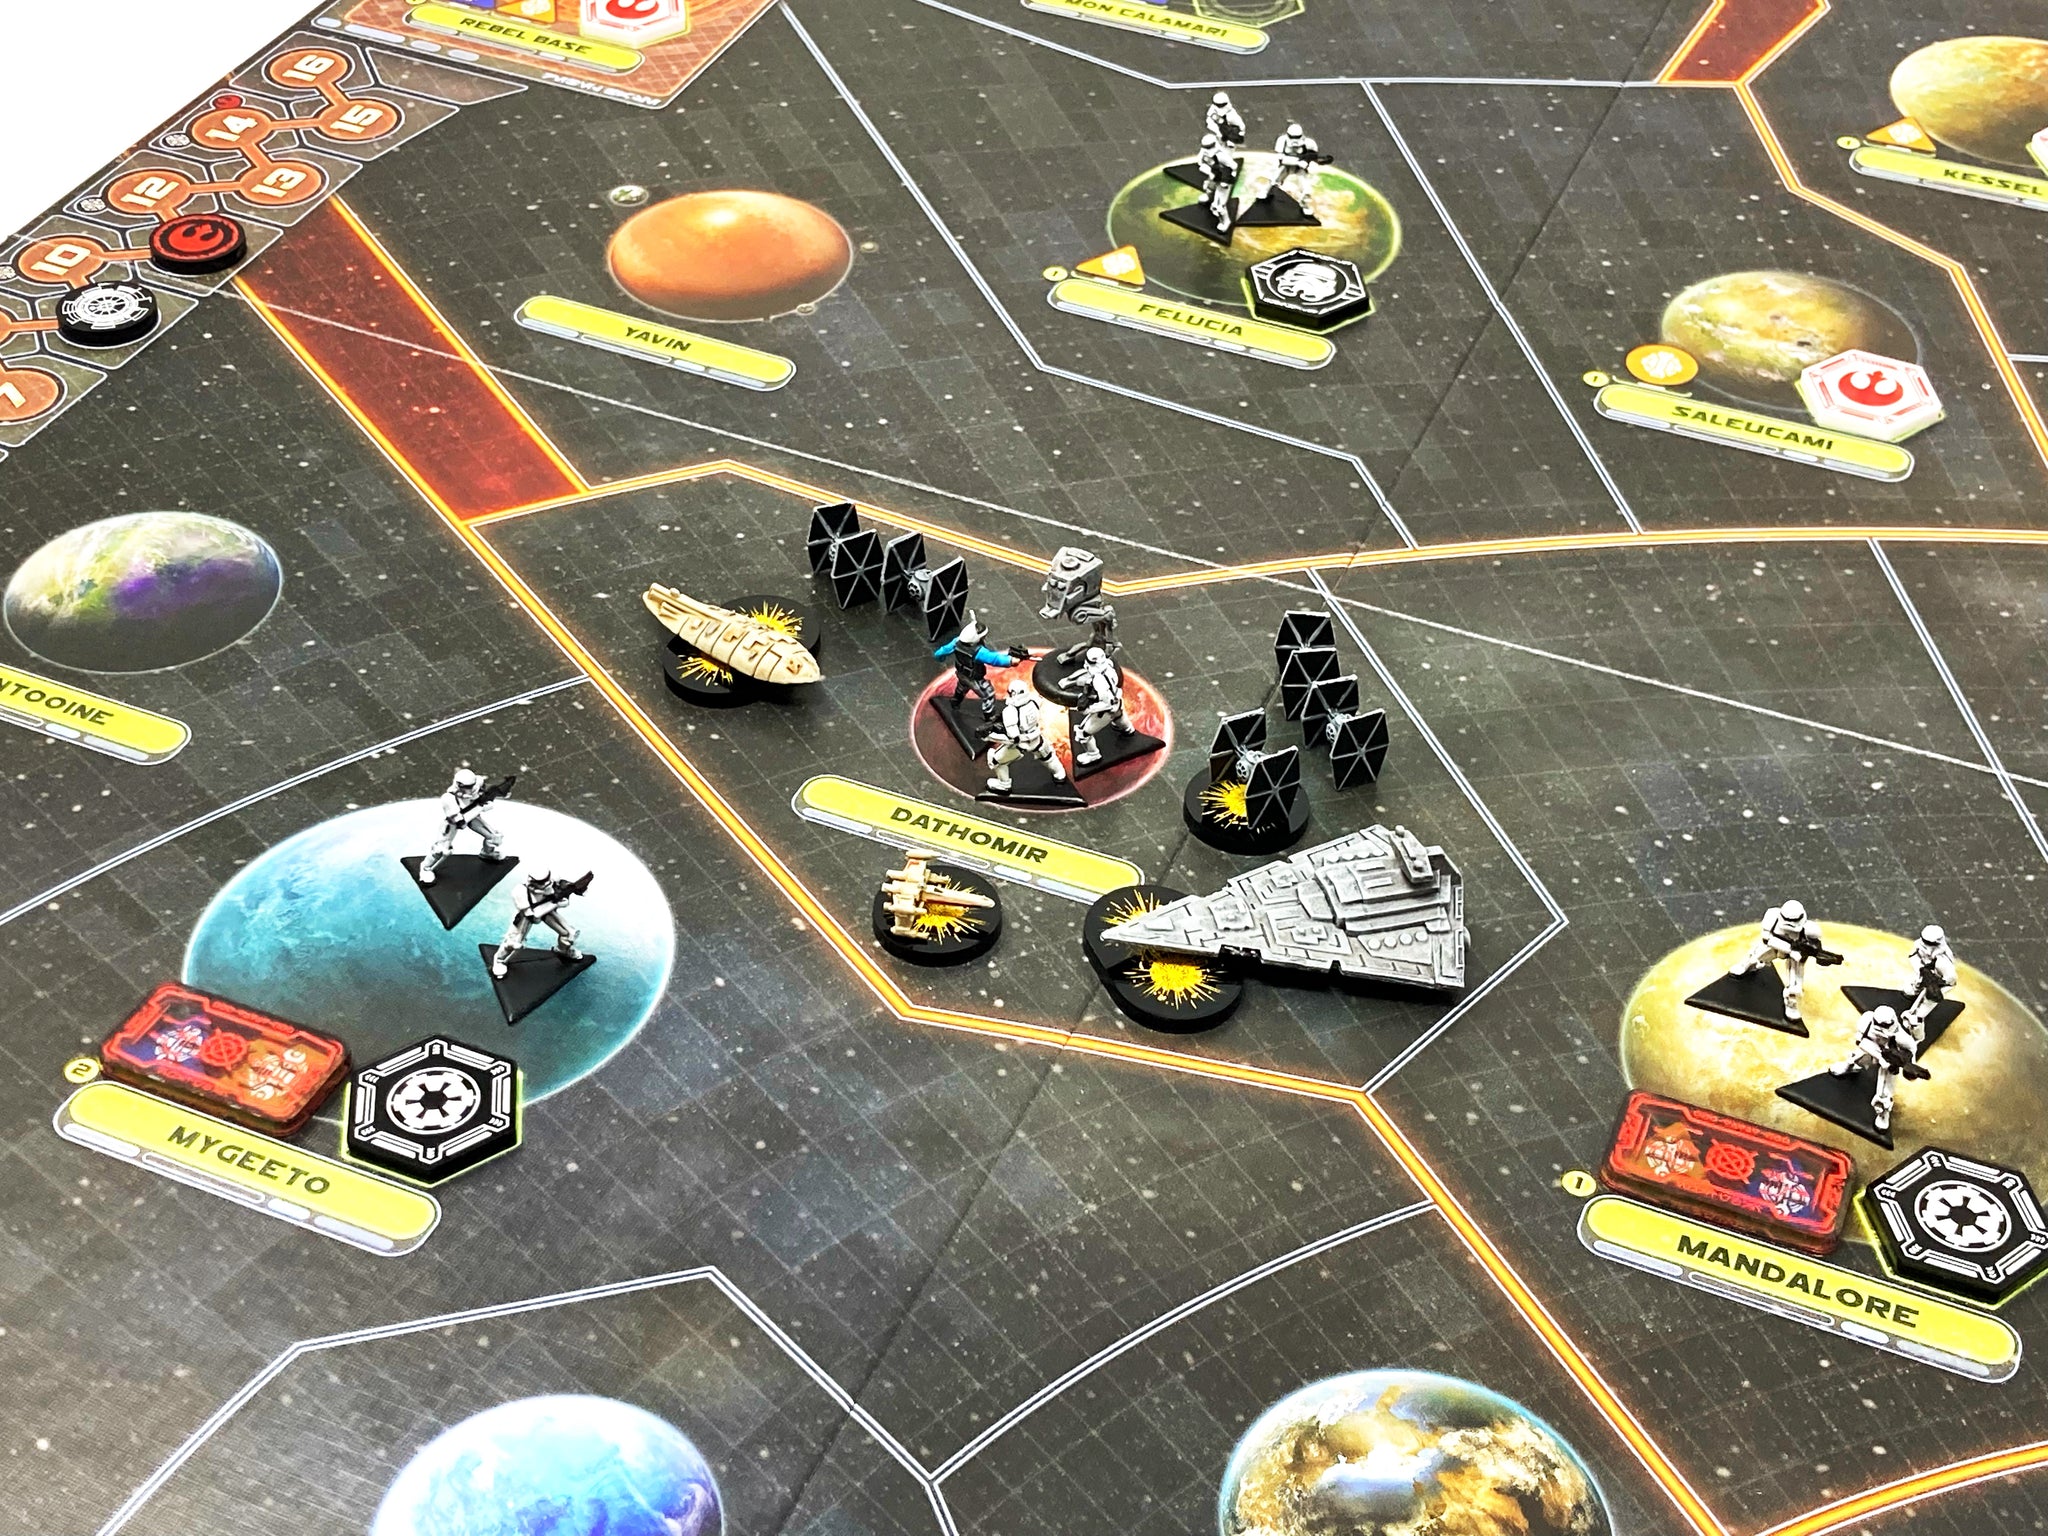 4 x Double Damage tokens for Star Wars Rebellion